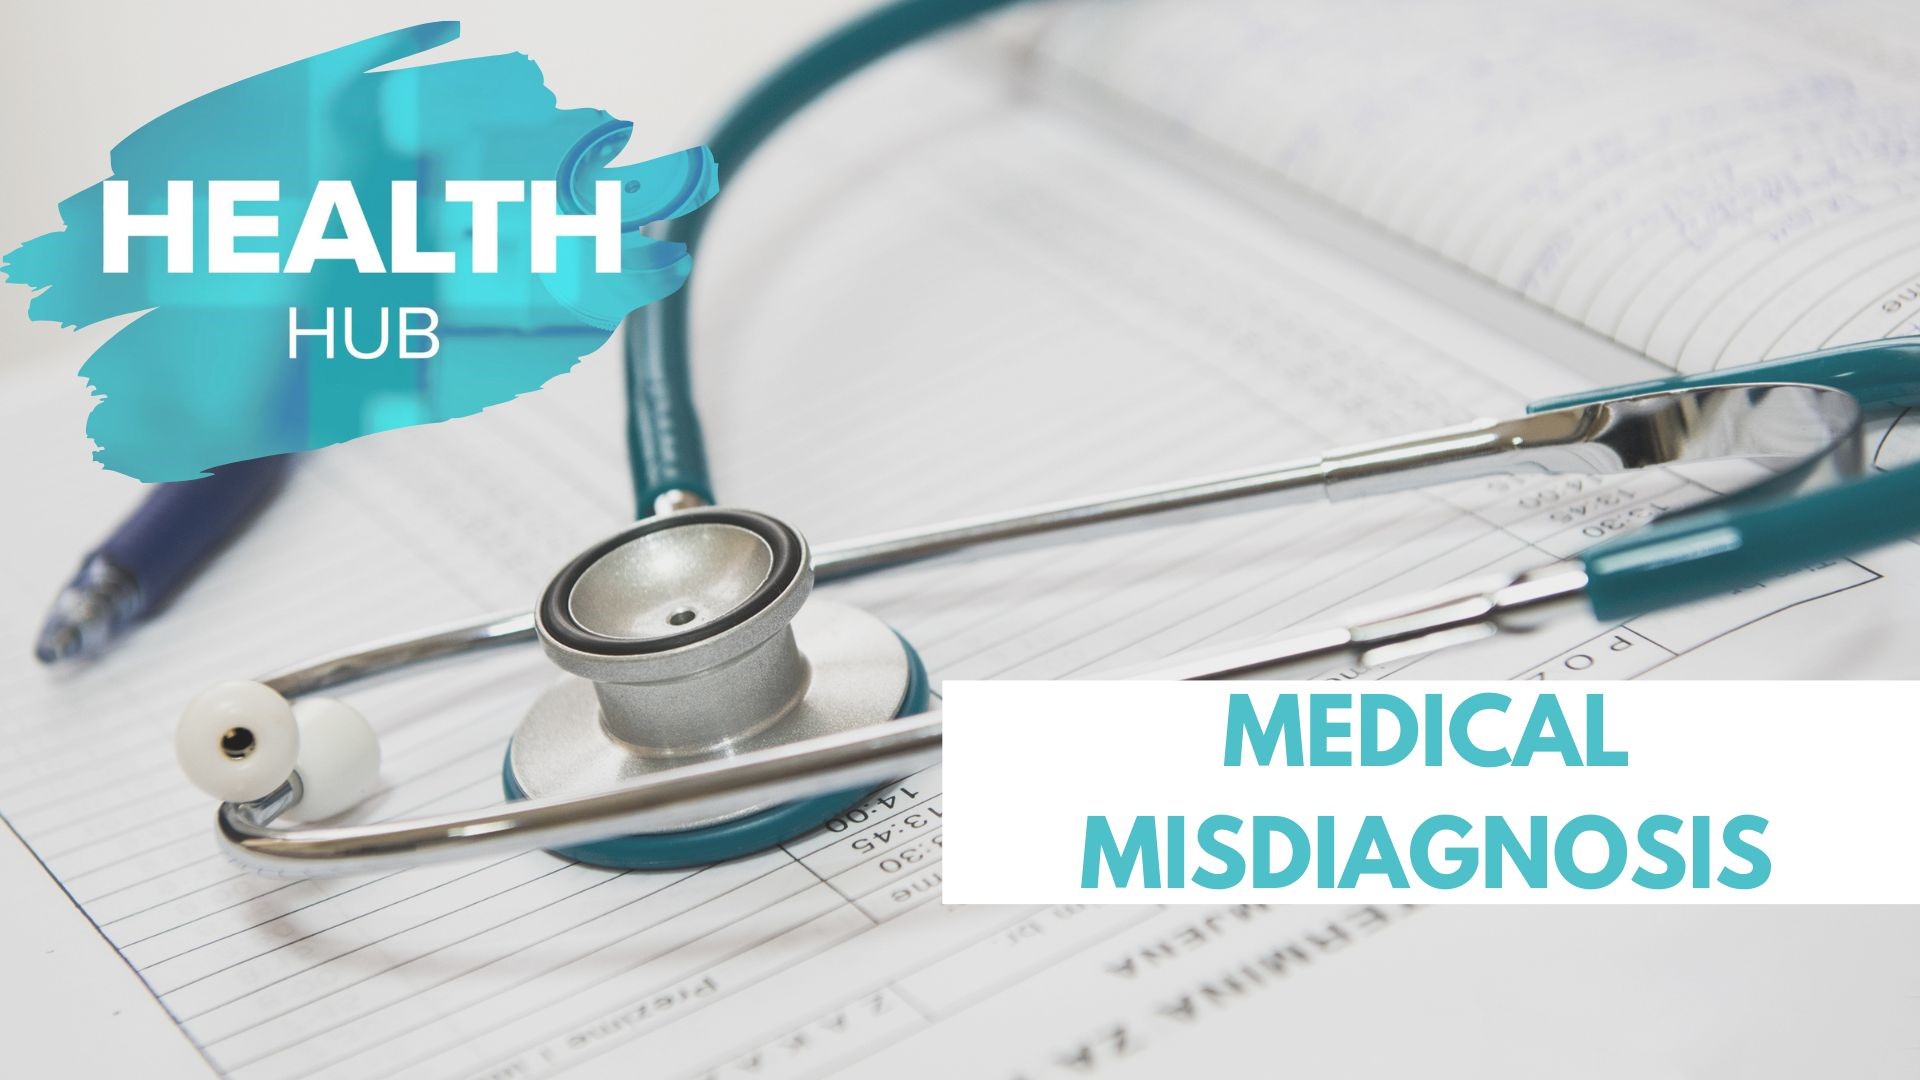 A look into medical misdiagnoses and how detrimental they can be for patients. From veterans to young athletes, we dive into misdiagnoses and how they were found.